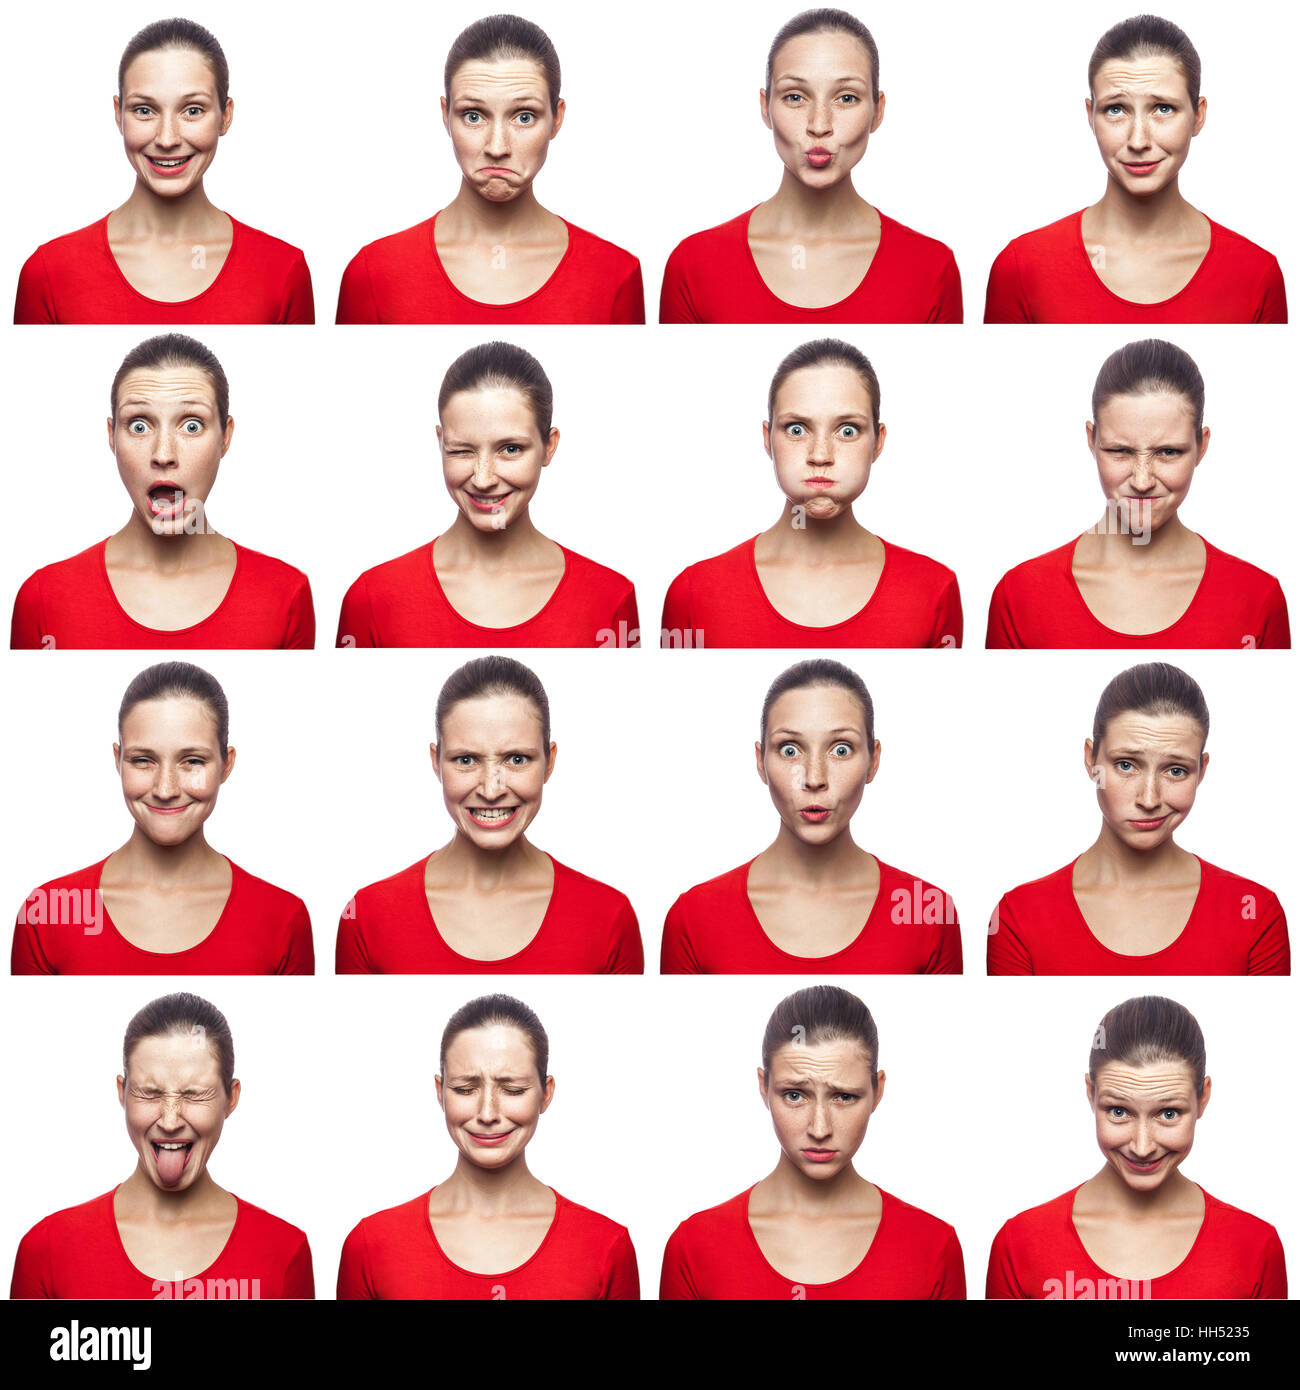 Mosaic of woman with freckles expressing different emotions expressions. The woman with red t-shirt with 16 different emotions. Stock Photo